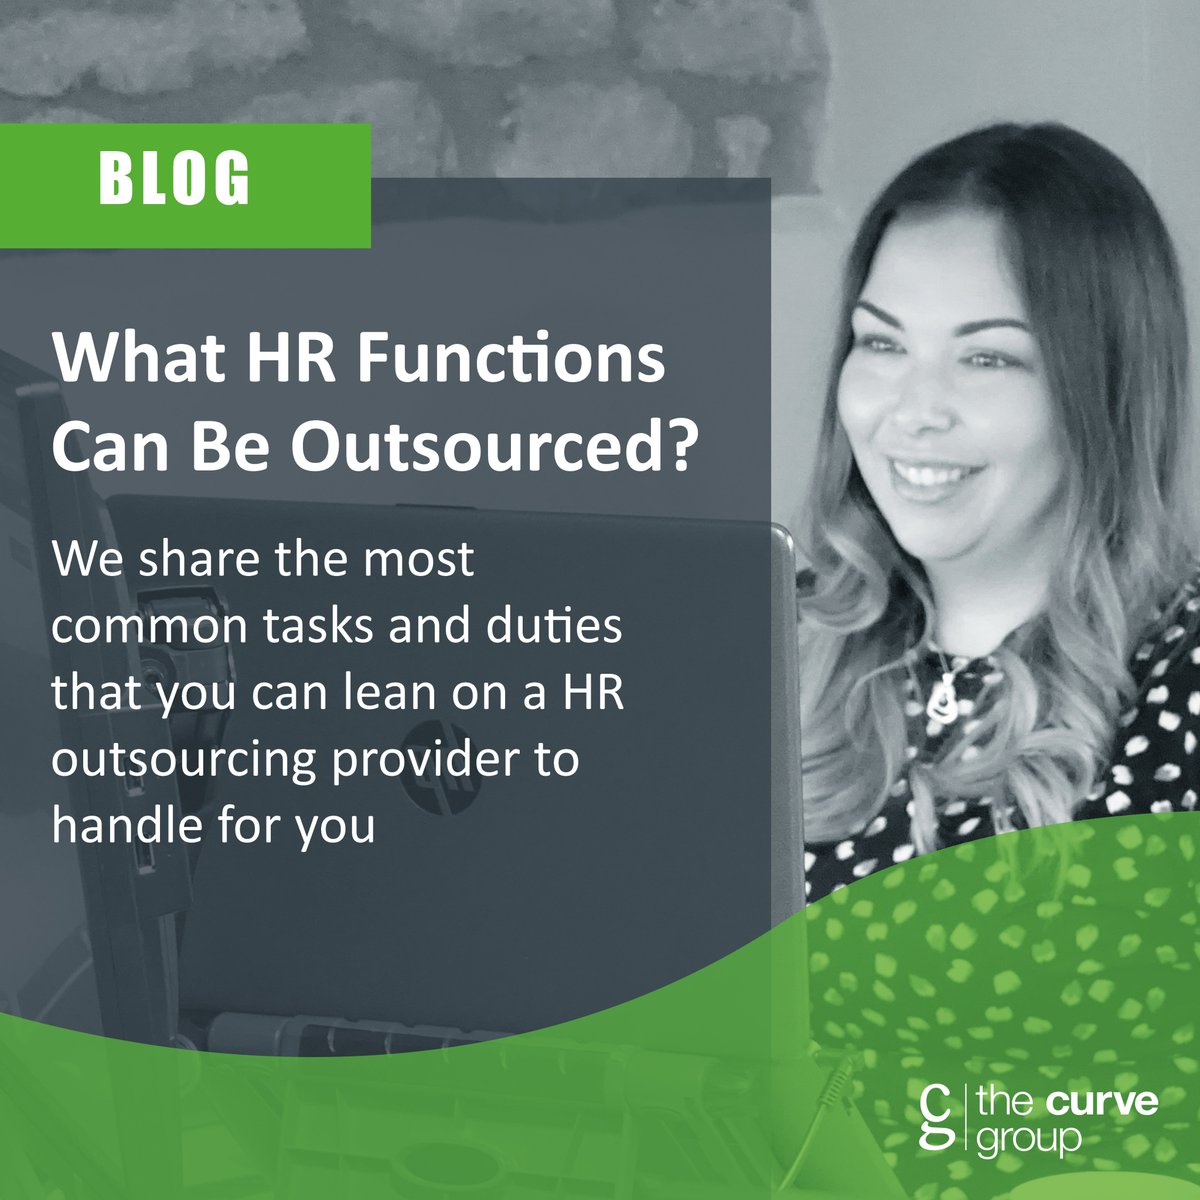 If your HR team is struggling to keep on top of an ever-growing list of duties, outsourcing specific HR functions can help relieve the pressure.

But, what HR functions can be outsourced? Read our latest blog to find out! 
lnkd.in/eEen8z6q

#HRoutsourcing #HRfunctions #HR